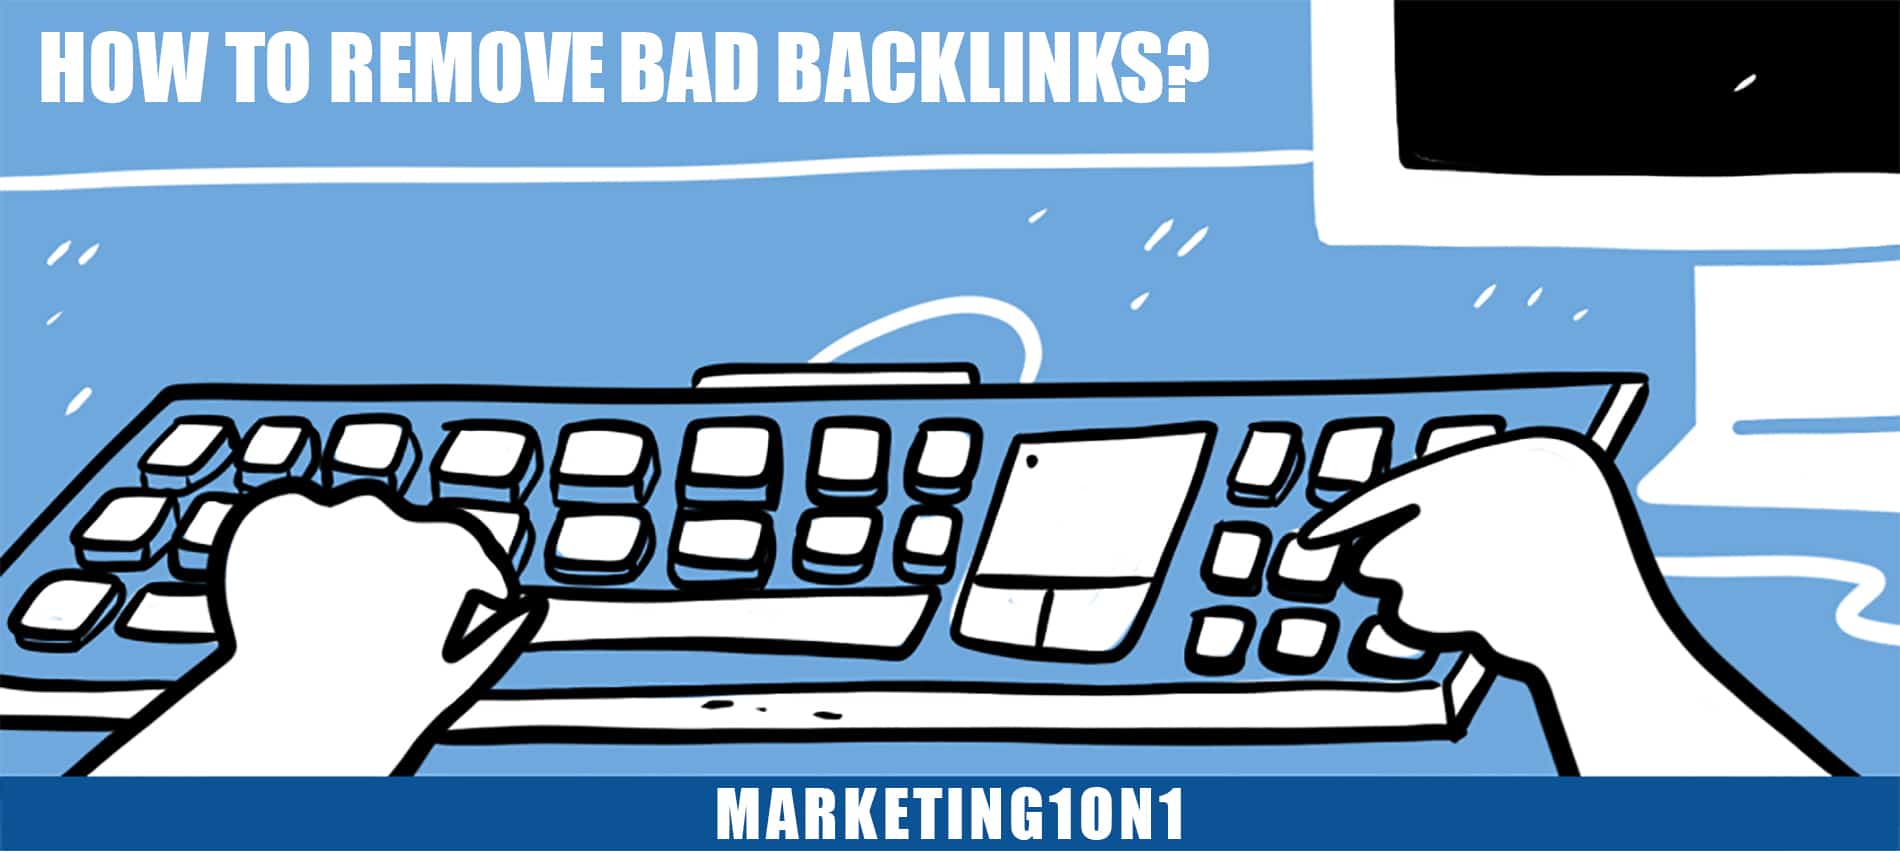 How to remove bad backlinks?